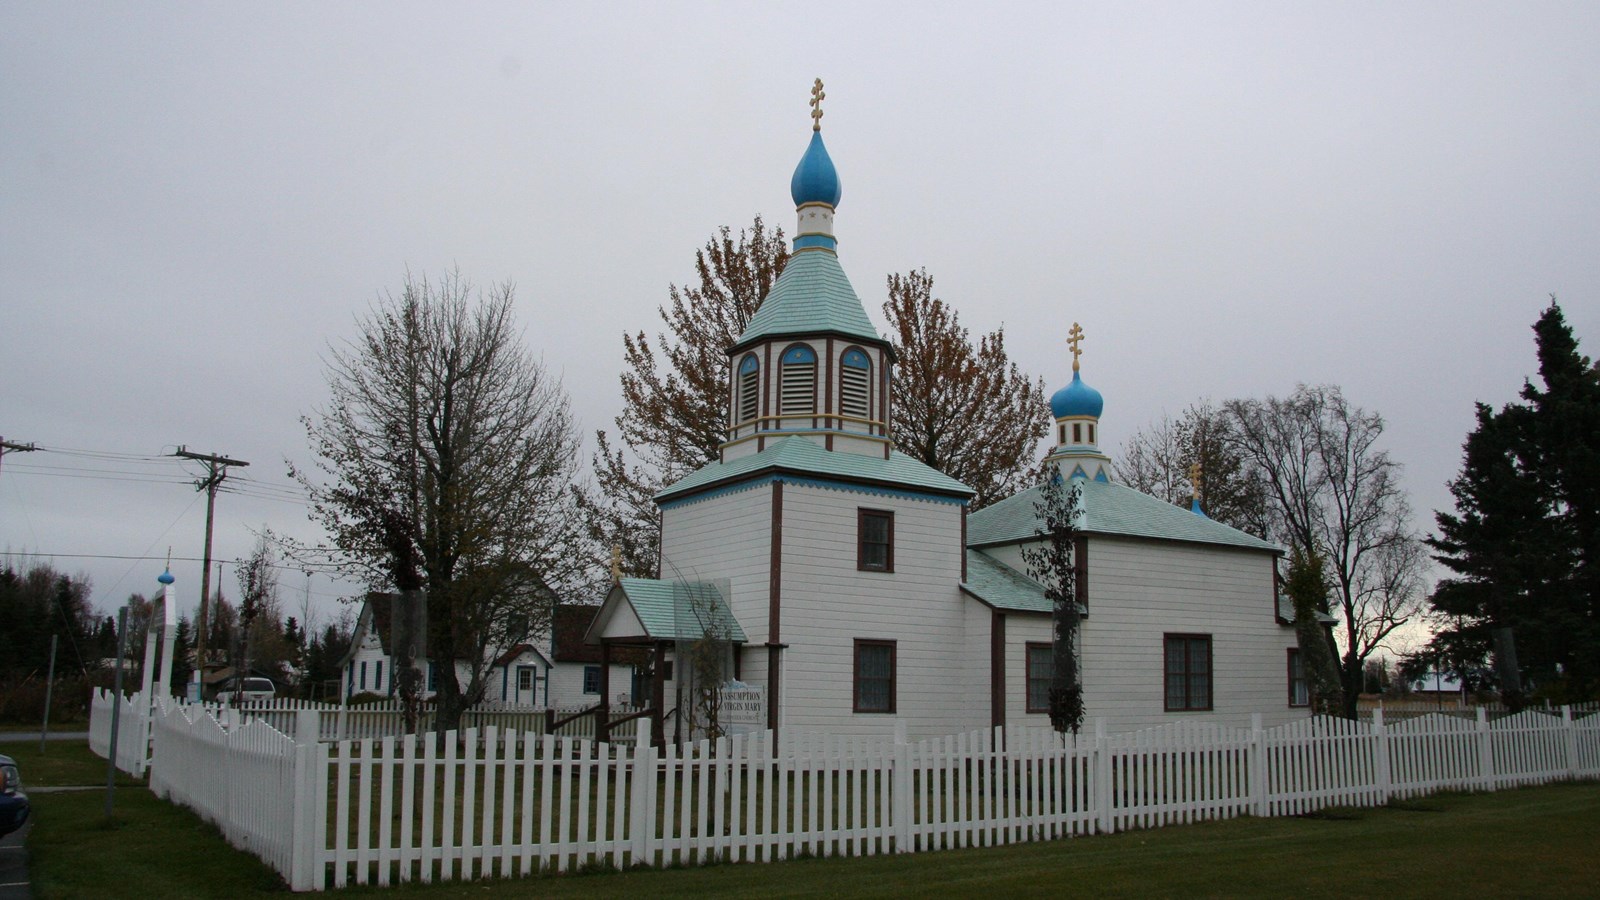 A small white Russian Orthodox church with a blue dome and surrounded by a white picket fence.